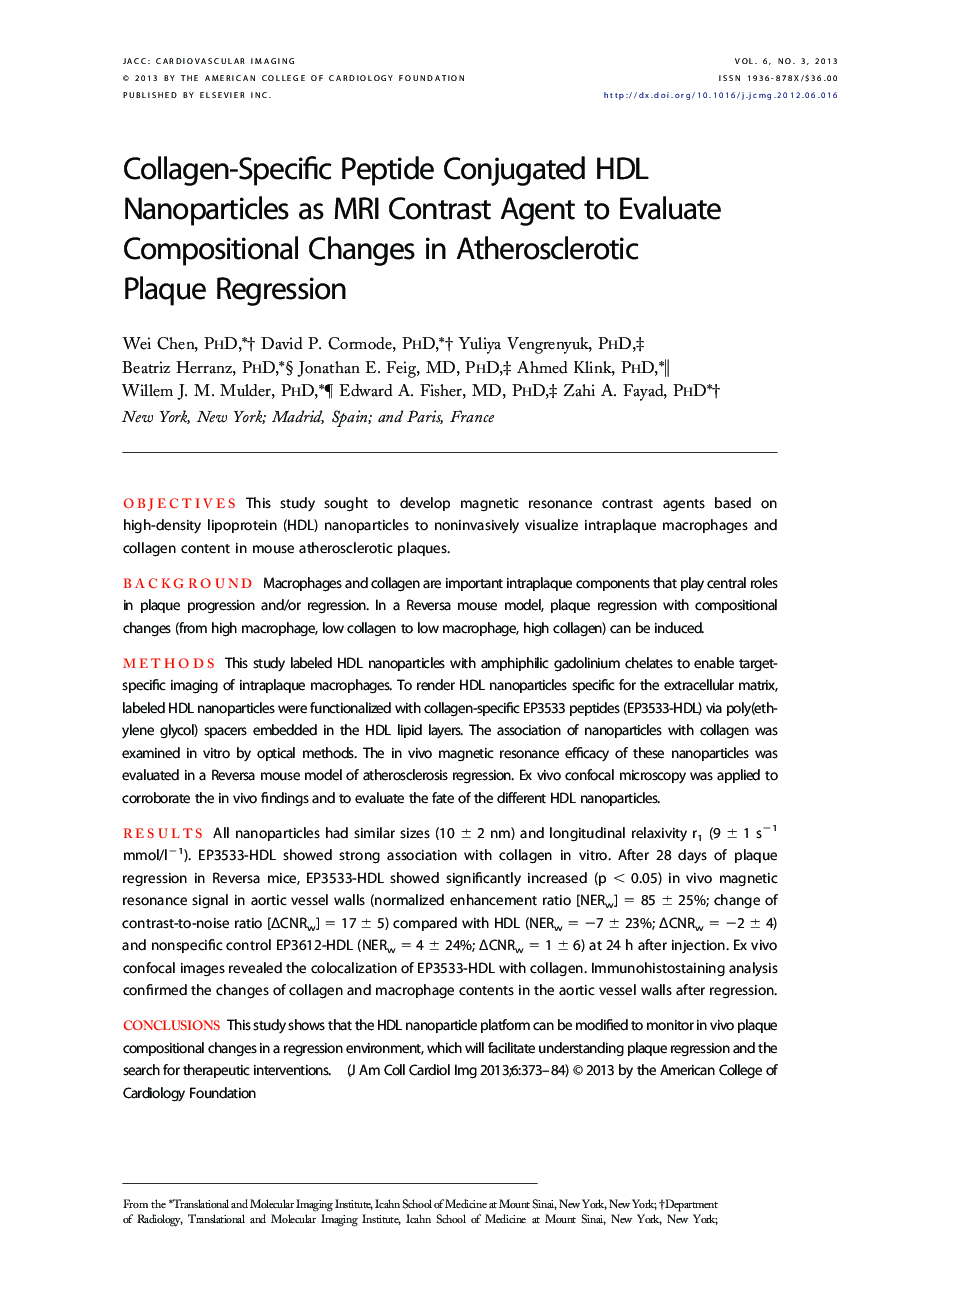 Collagen-Specific Peptide Conjugated HDL Nanoparticles as MRI Contrast Agent to Evaluate Compositional Changes in Atherosclerotic Plaque Regression 